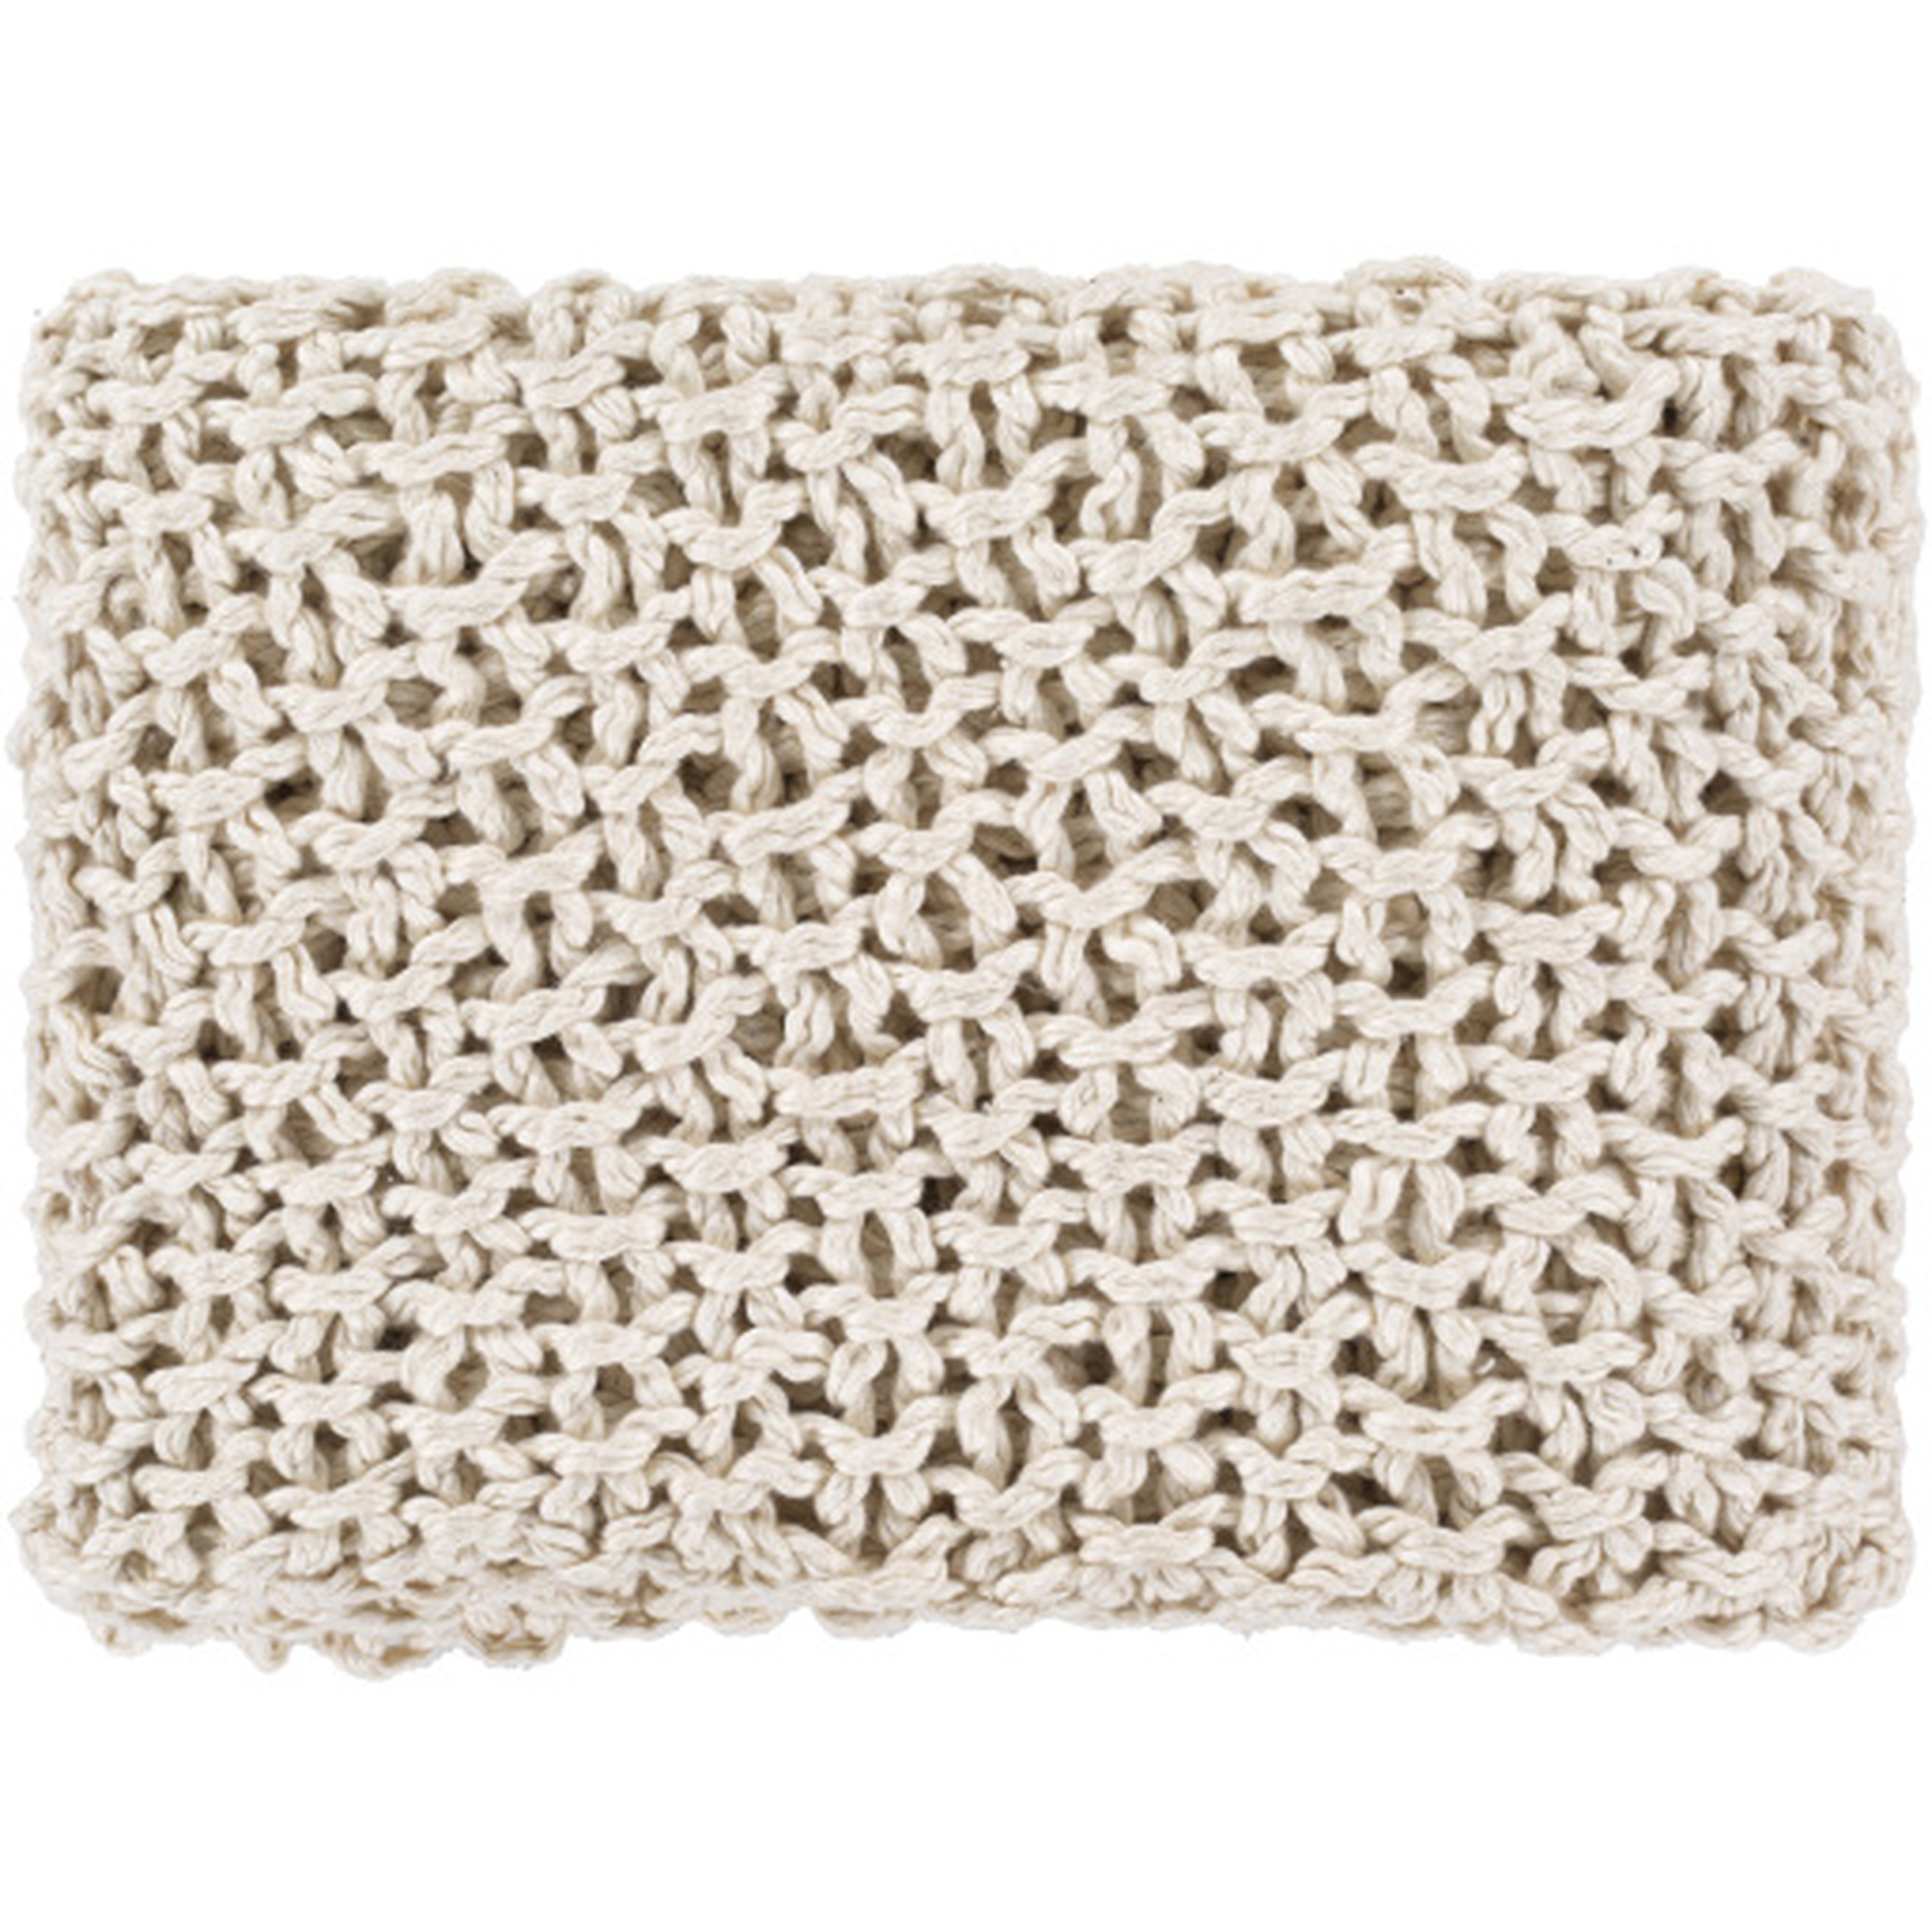 Cozy Knit Throw, Natural - Havenly Essentials